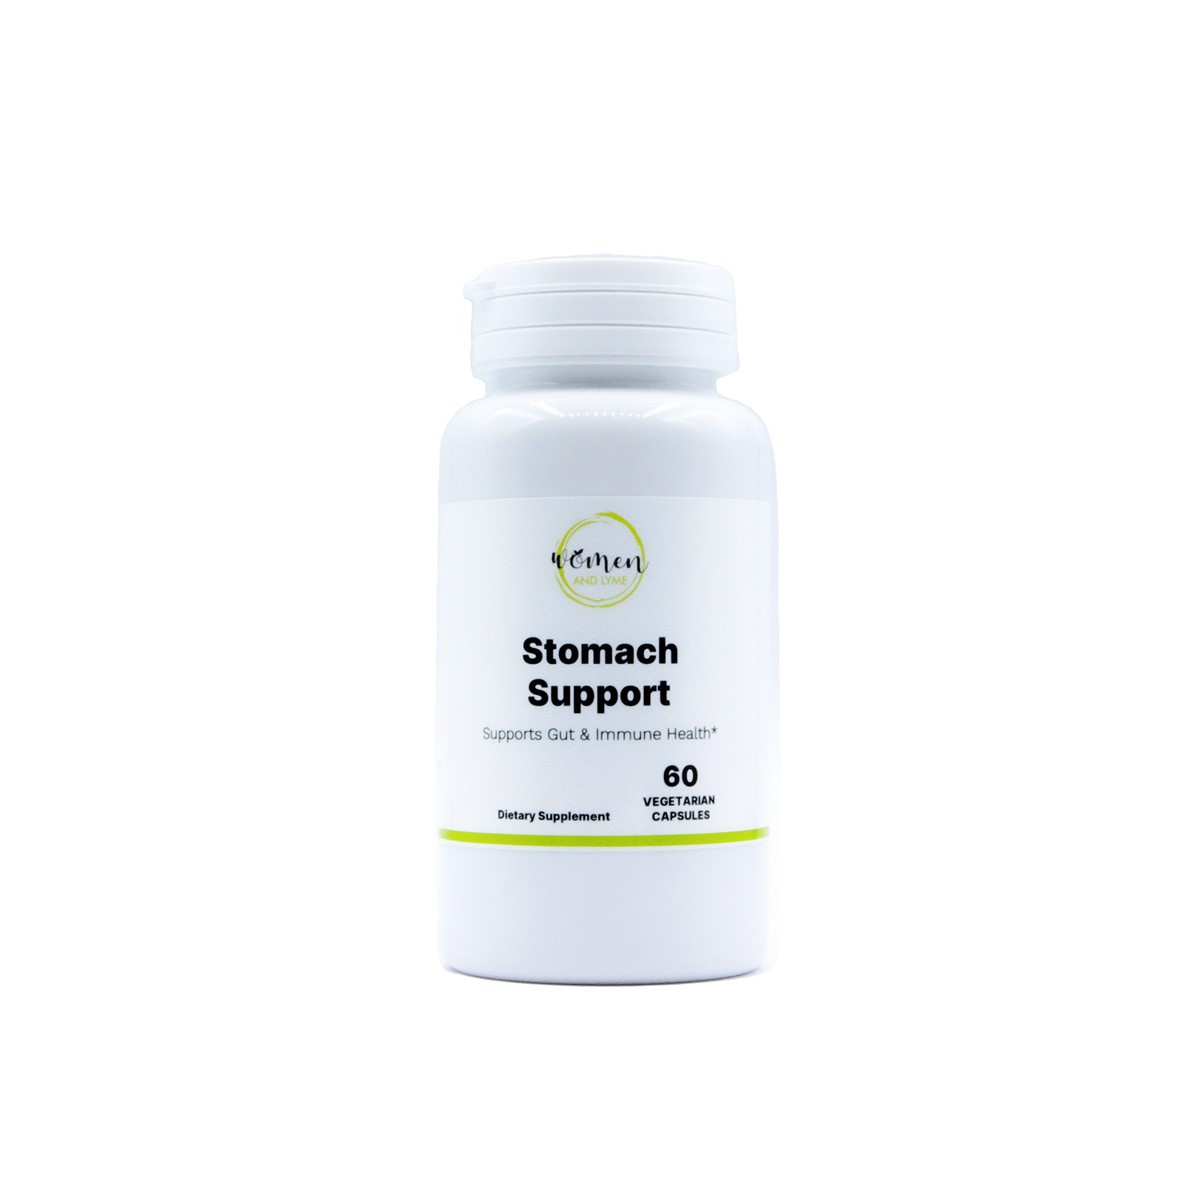 Stomach support